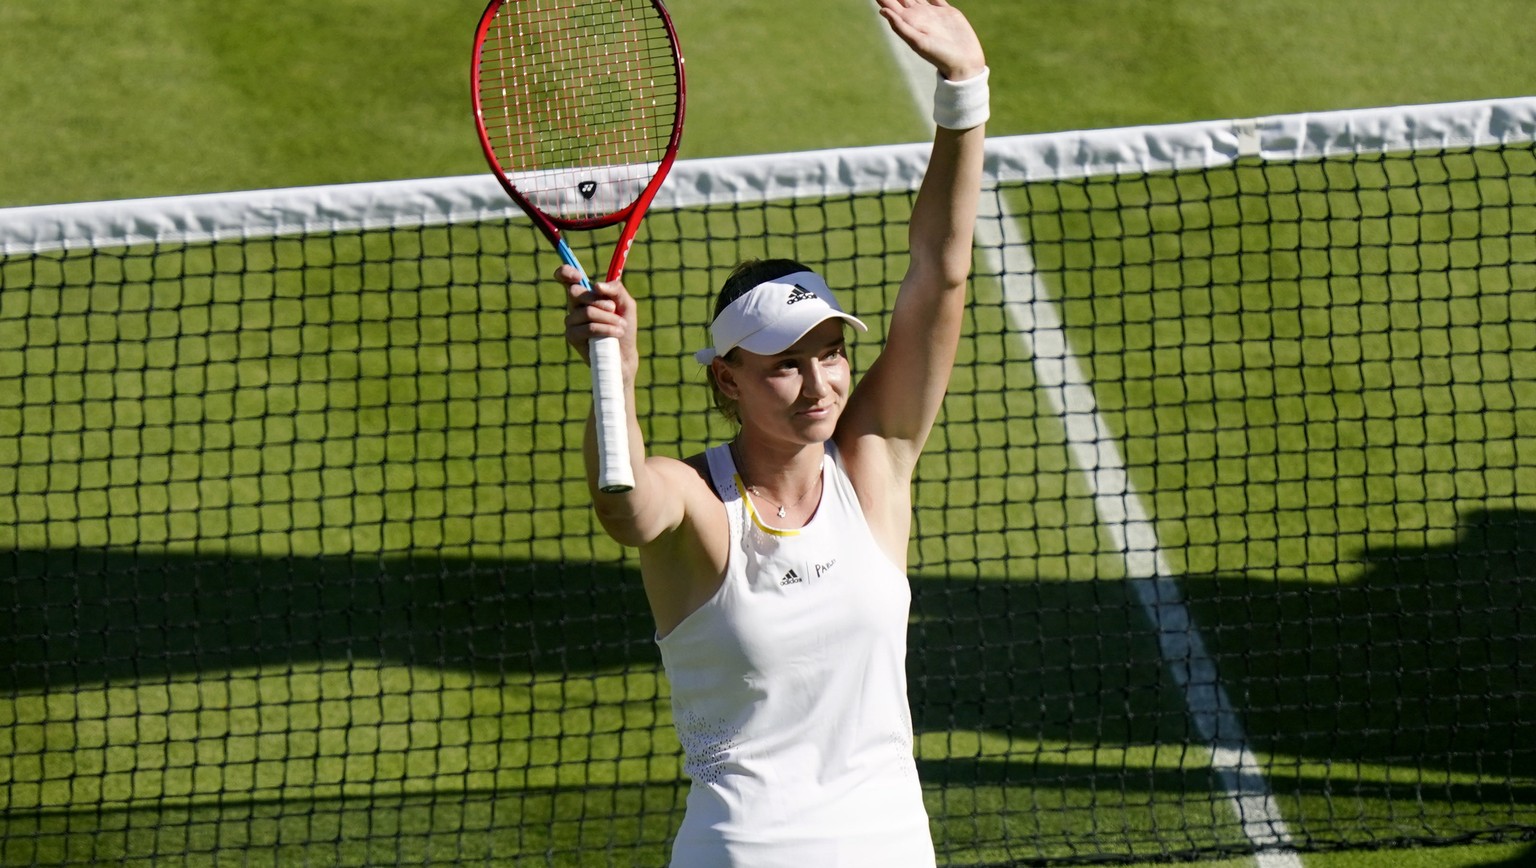 Kazakhstan&#039;s Elena Rybakina reacts to winning against Romania&#039;s Simona Halep in a women&#039;s singles semifinal match on day eleven of the Wimbledon tennis championships in London, Thursday ...